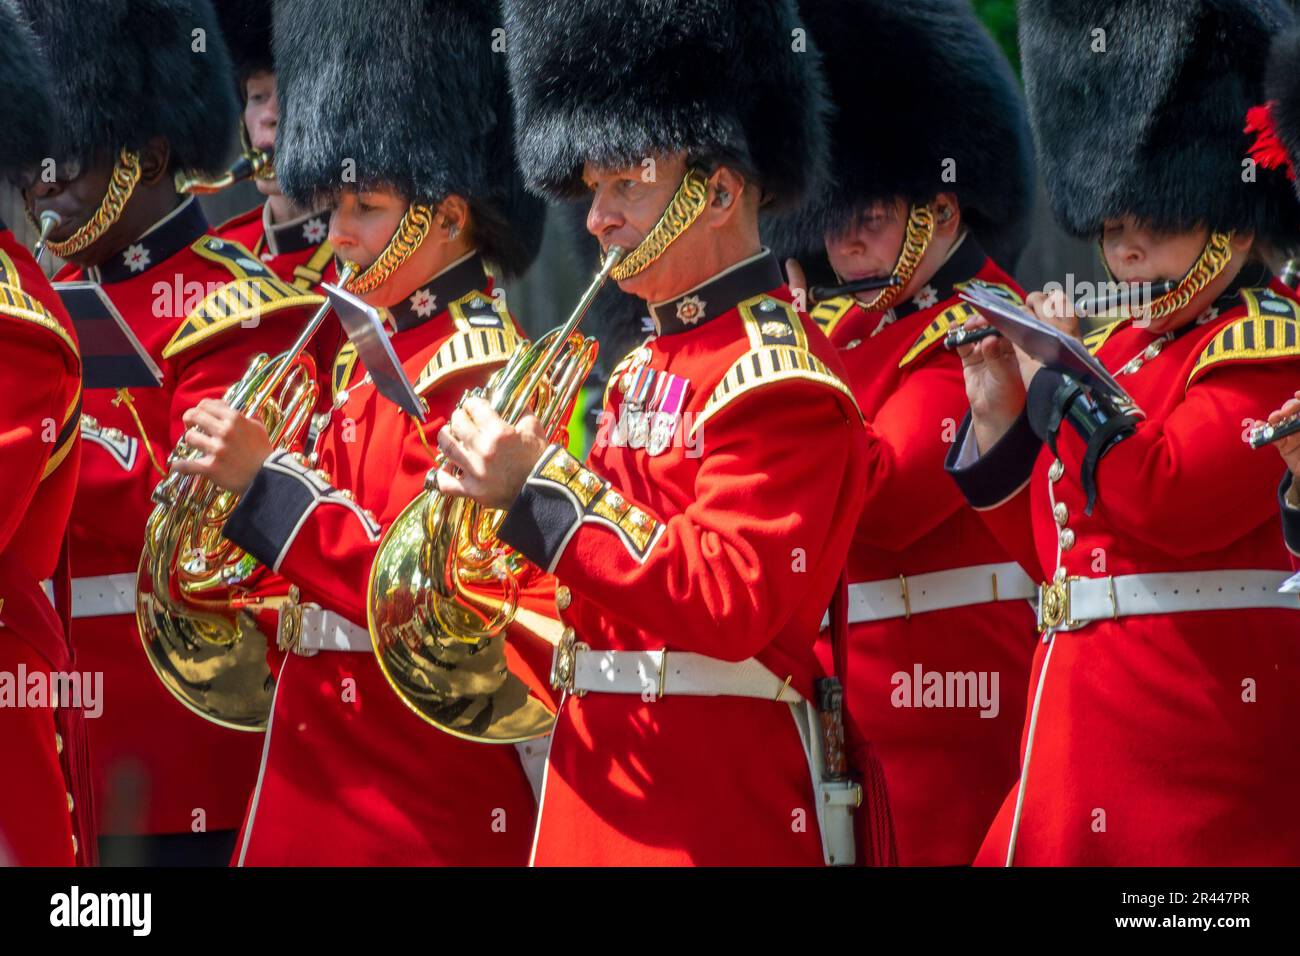 39,179 Band Uniforms Royalty-Free Images, Stock Photos & Pictures